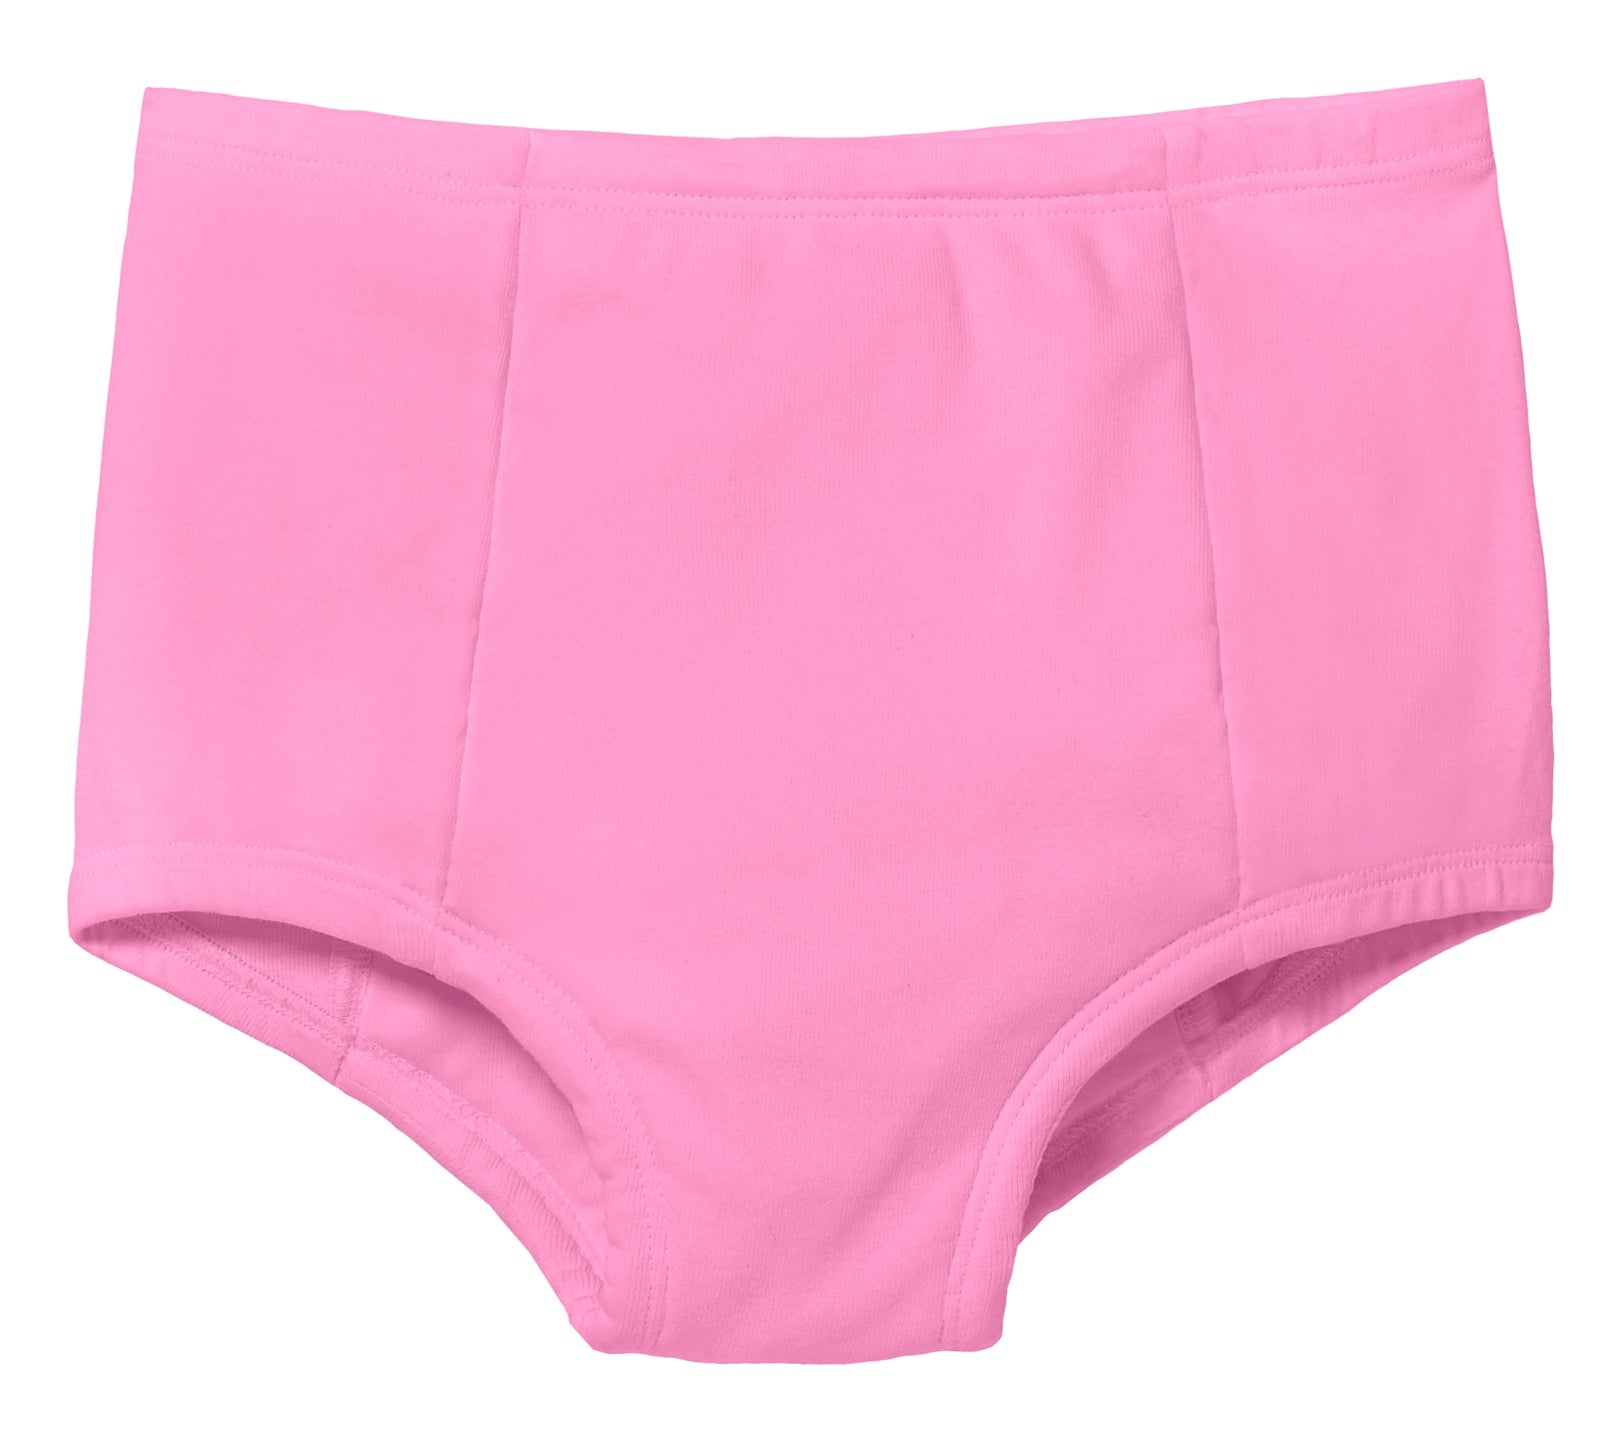  Training Underwear For Boys And Girls Absorbent